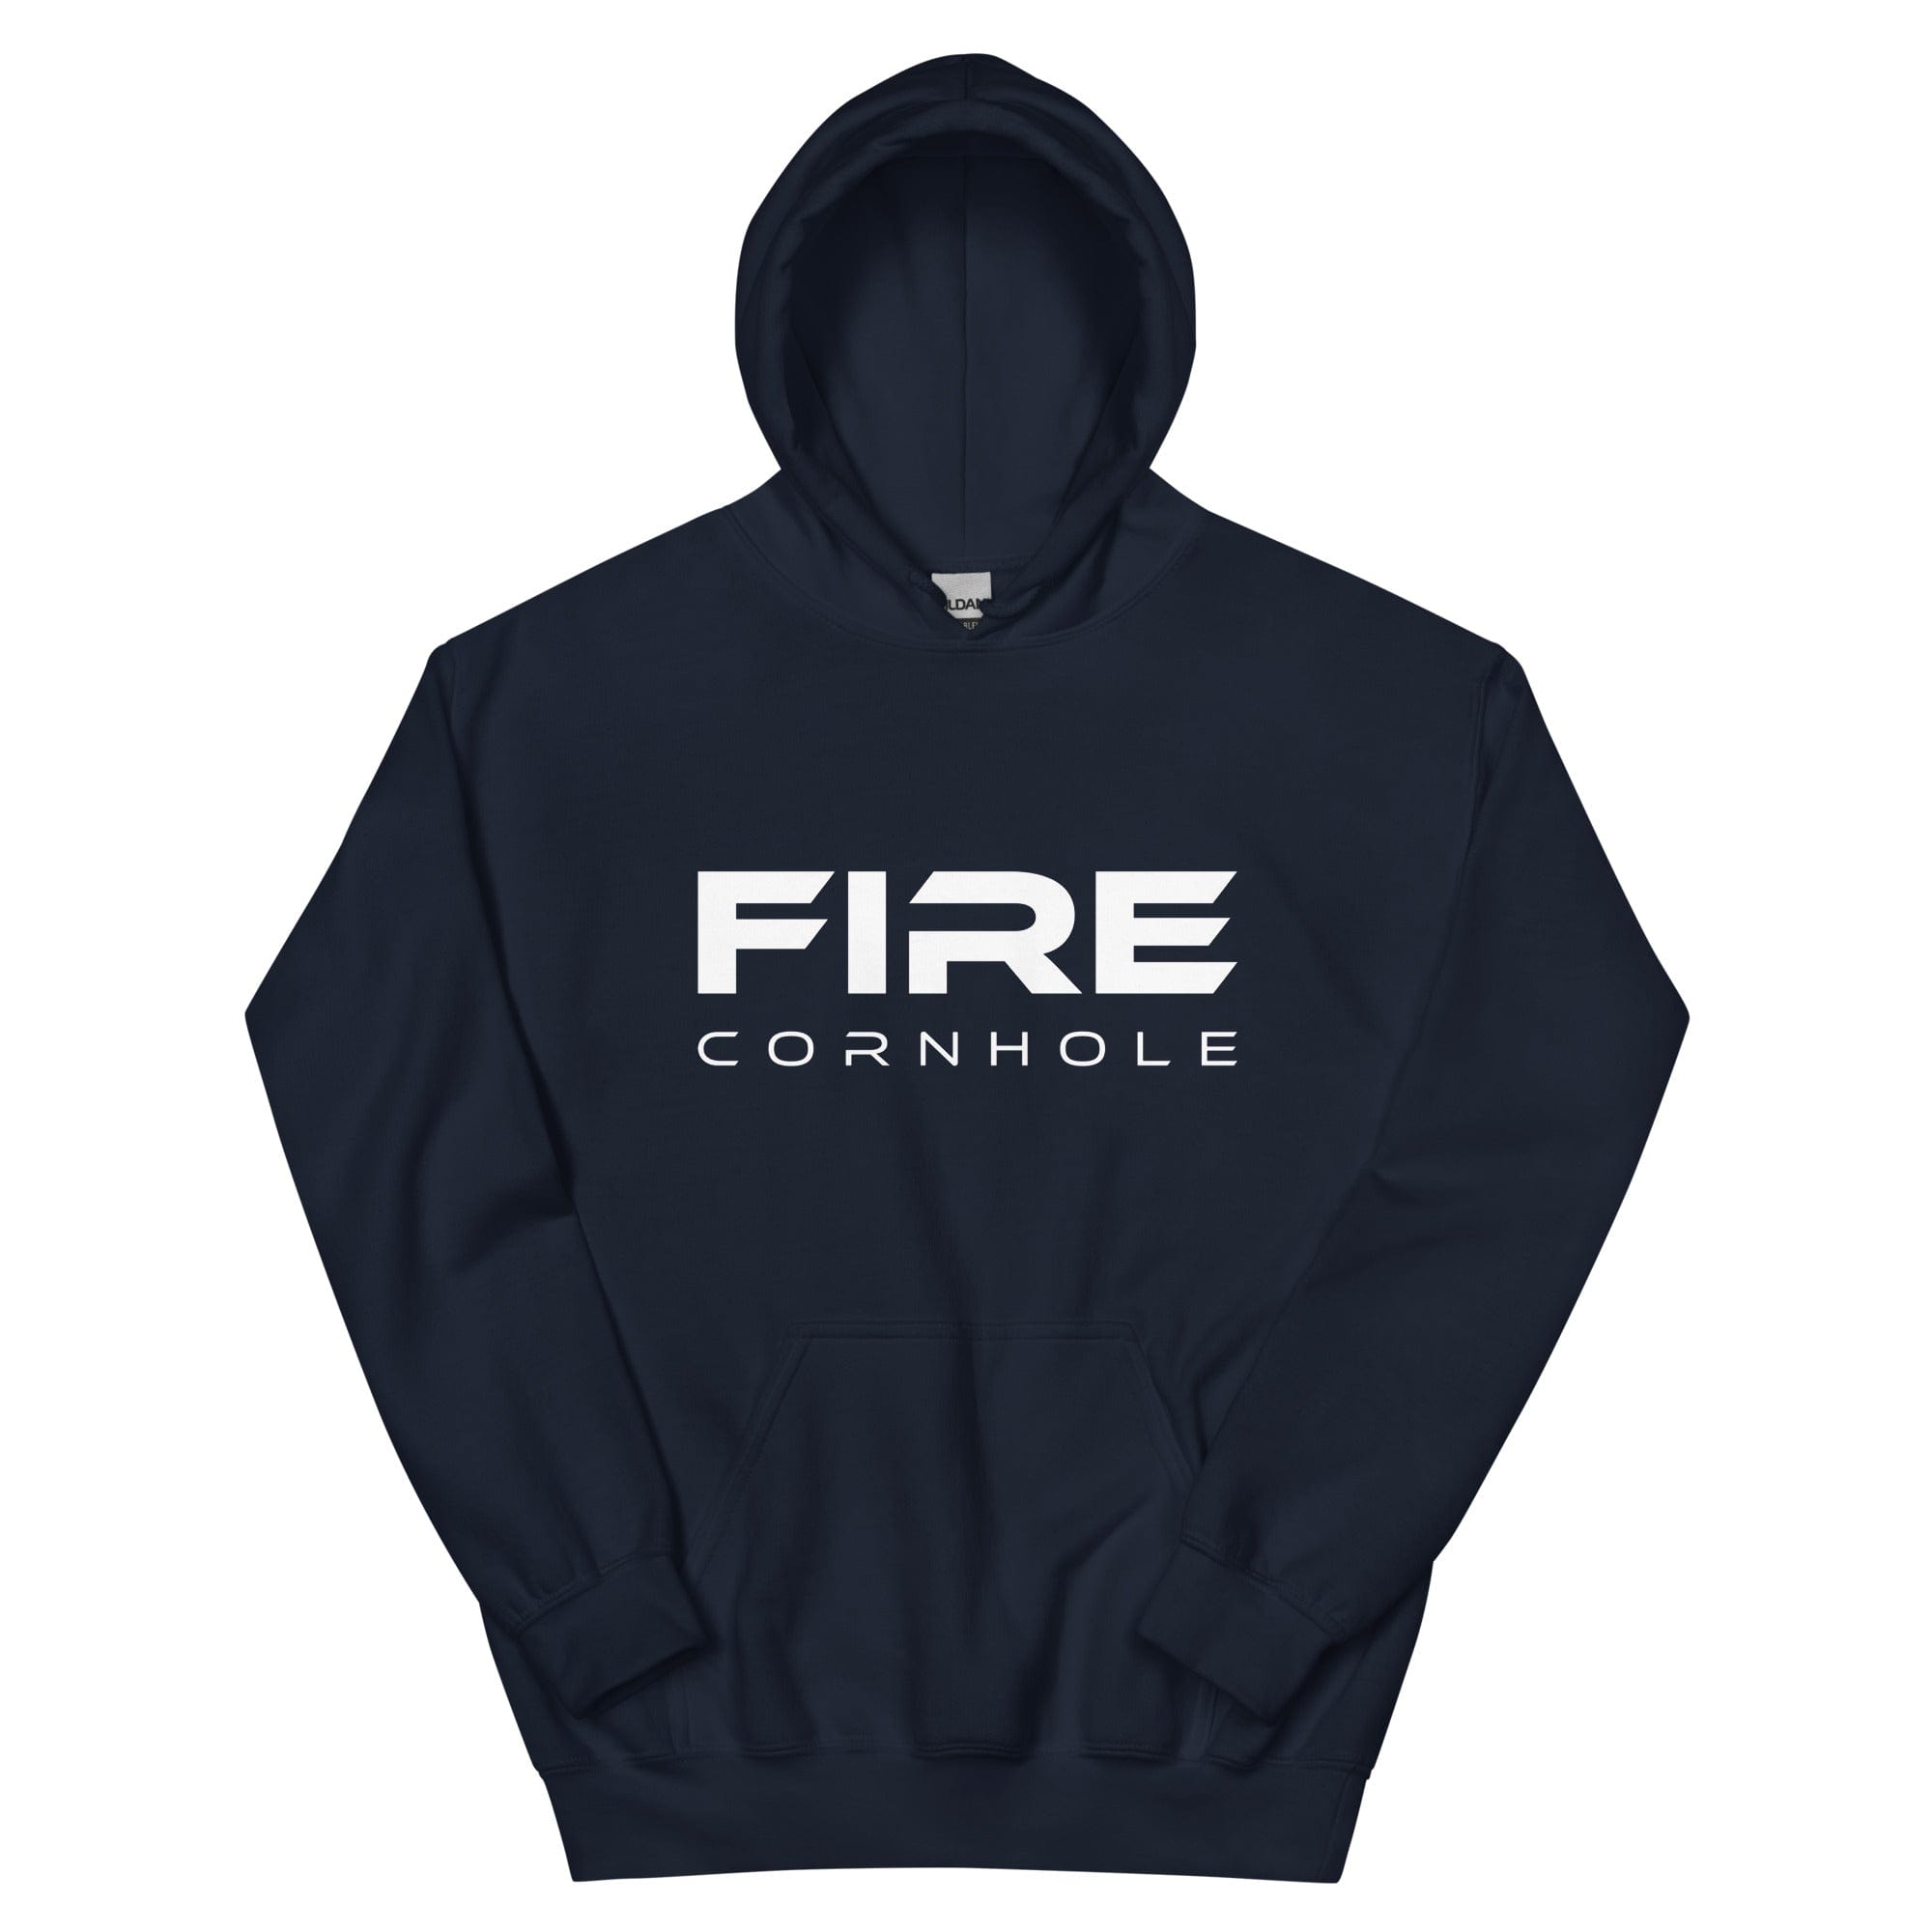 Navy unisex cotton hoodie with Fire Cornhole logo in white